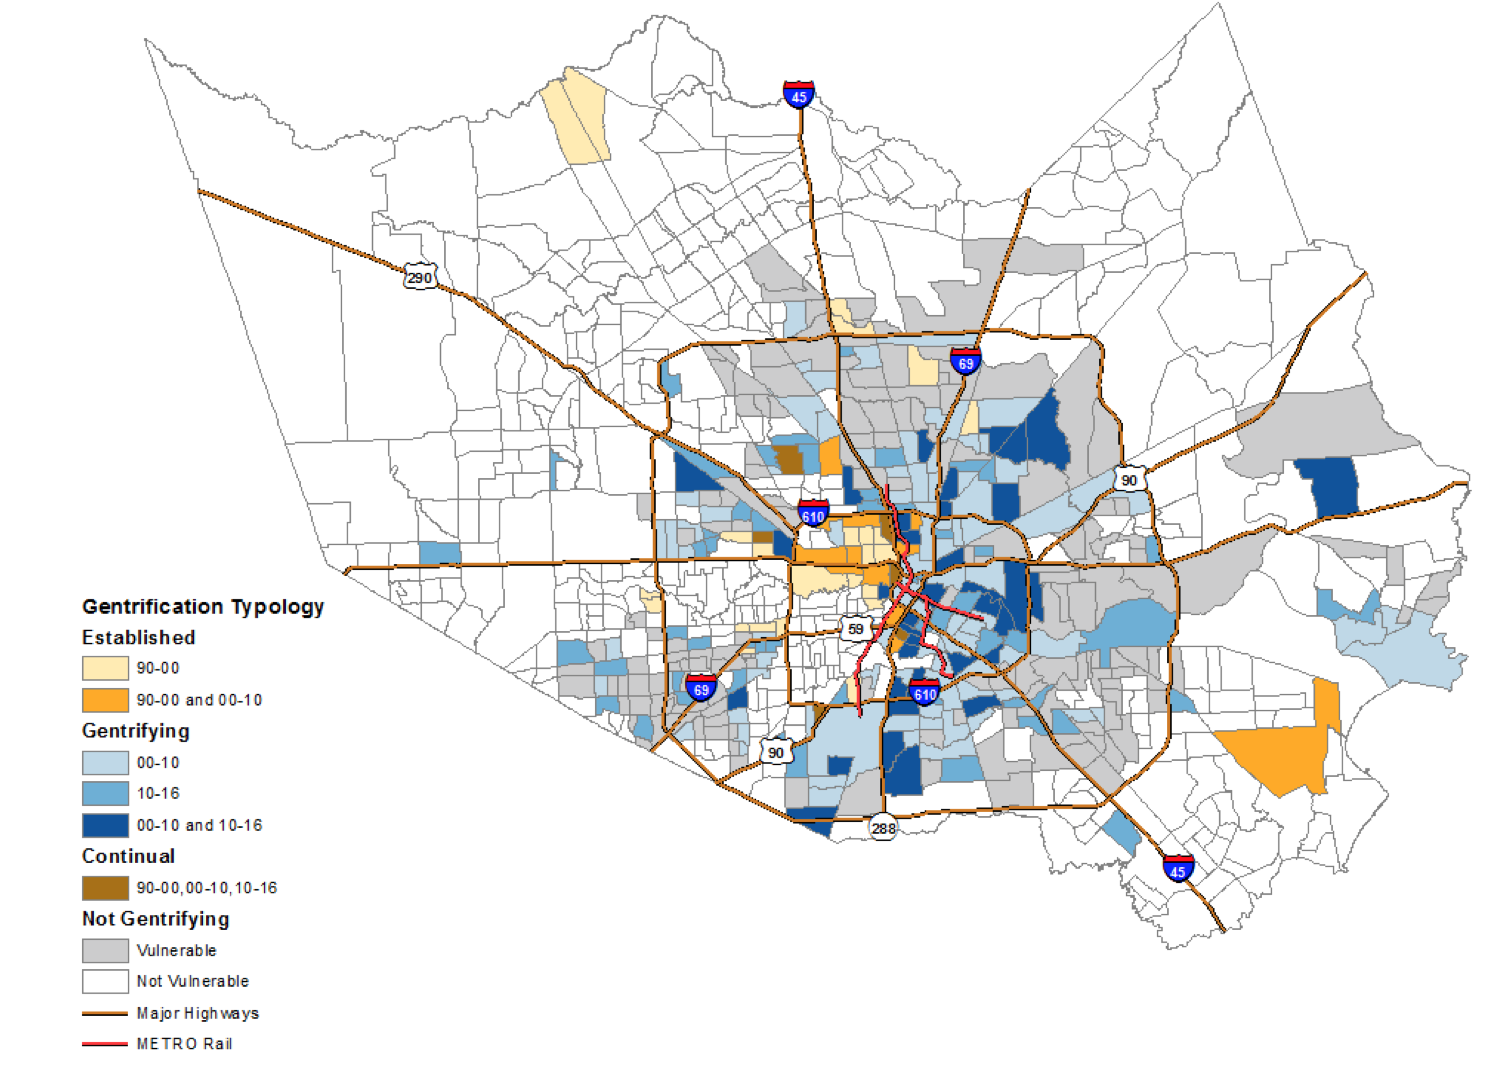 Map of gentrification typology across Harris County